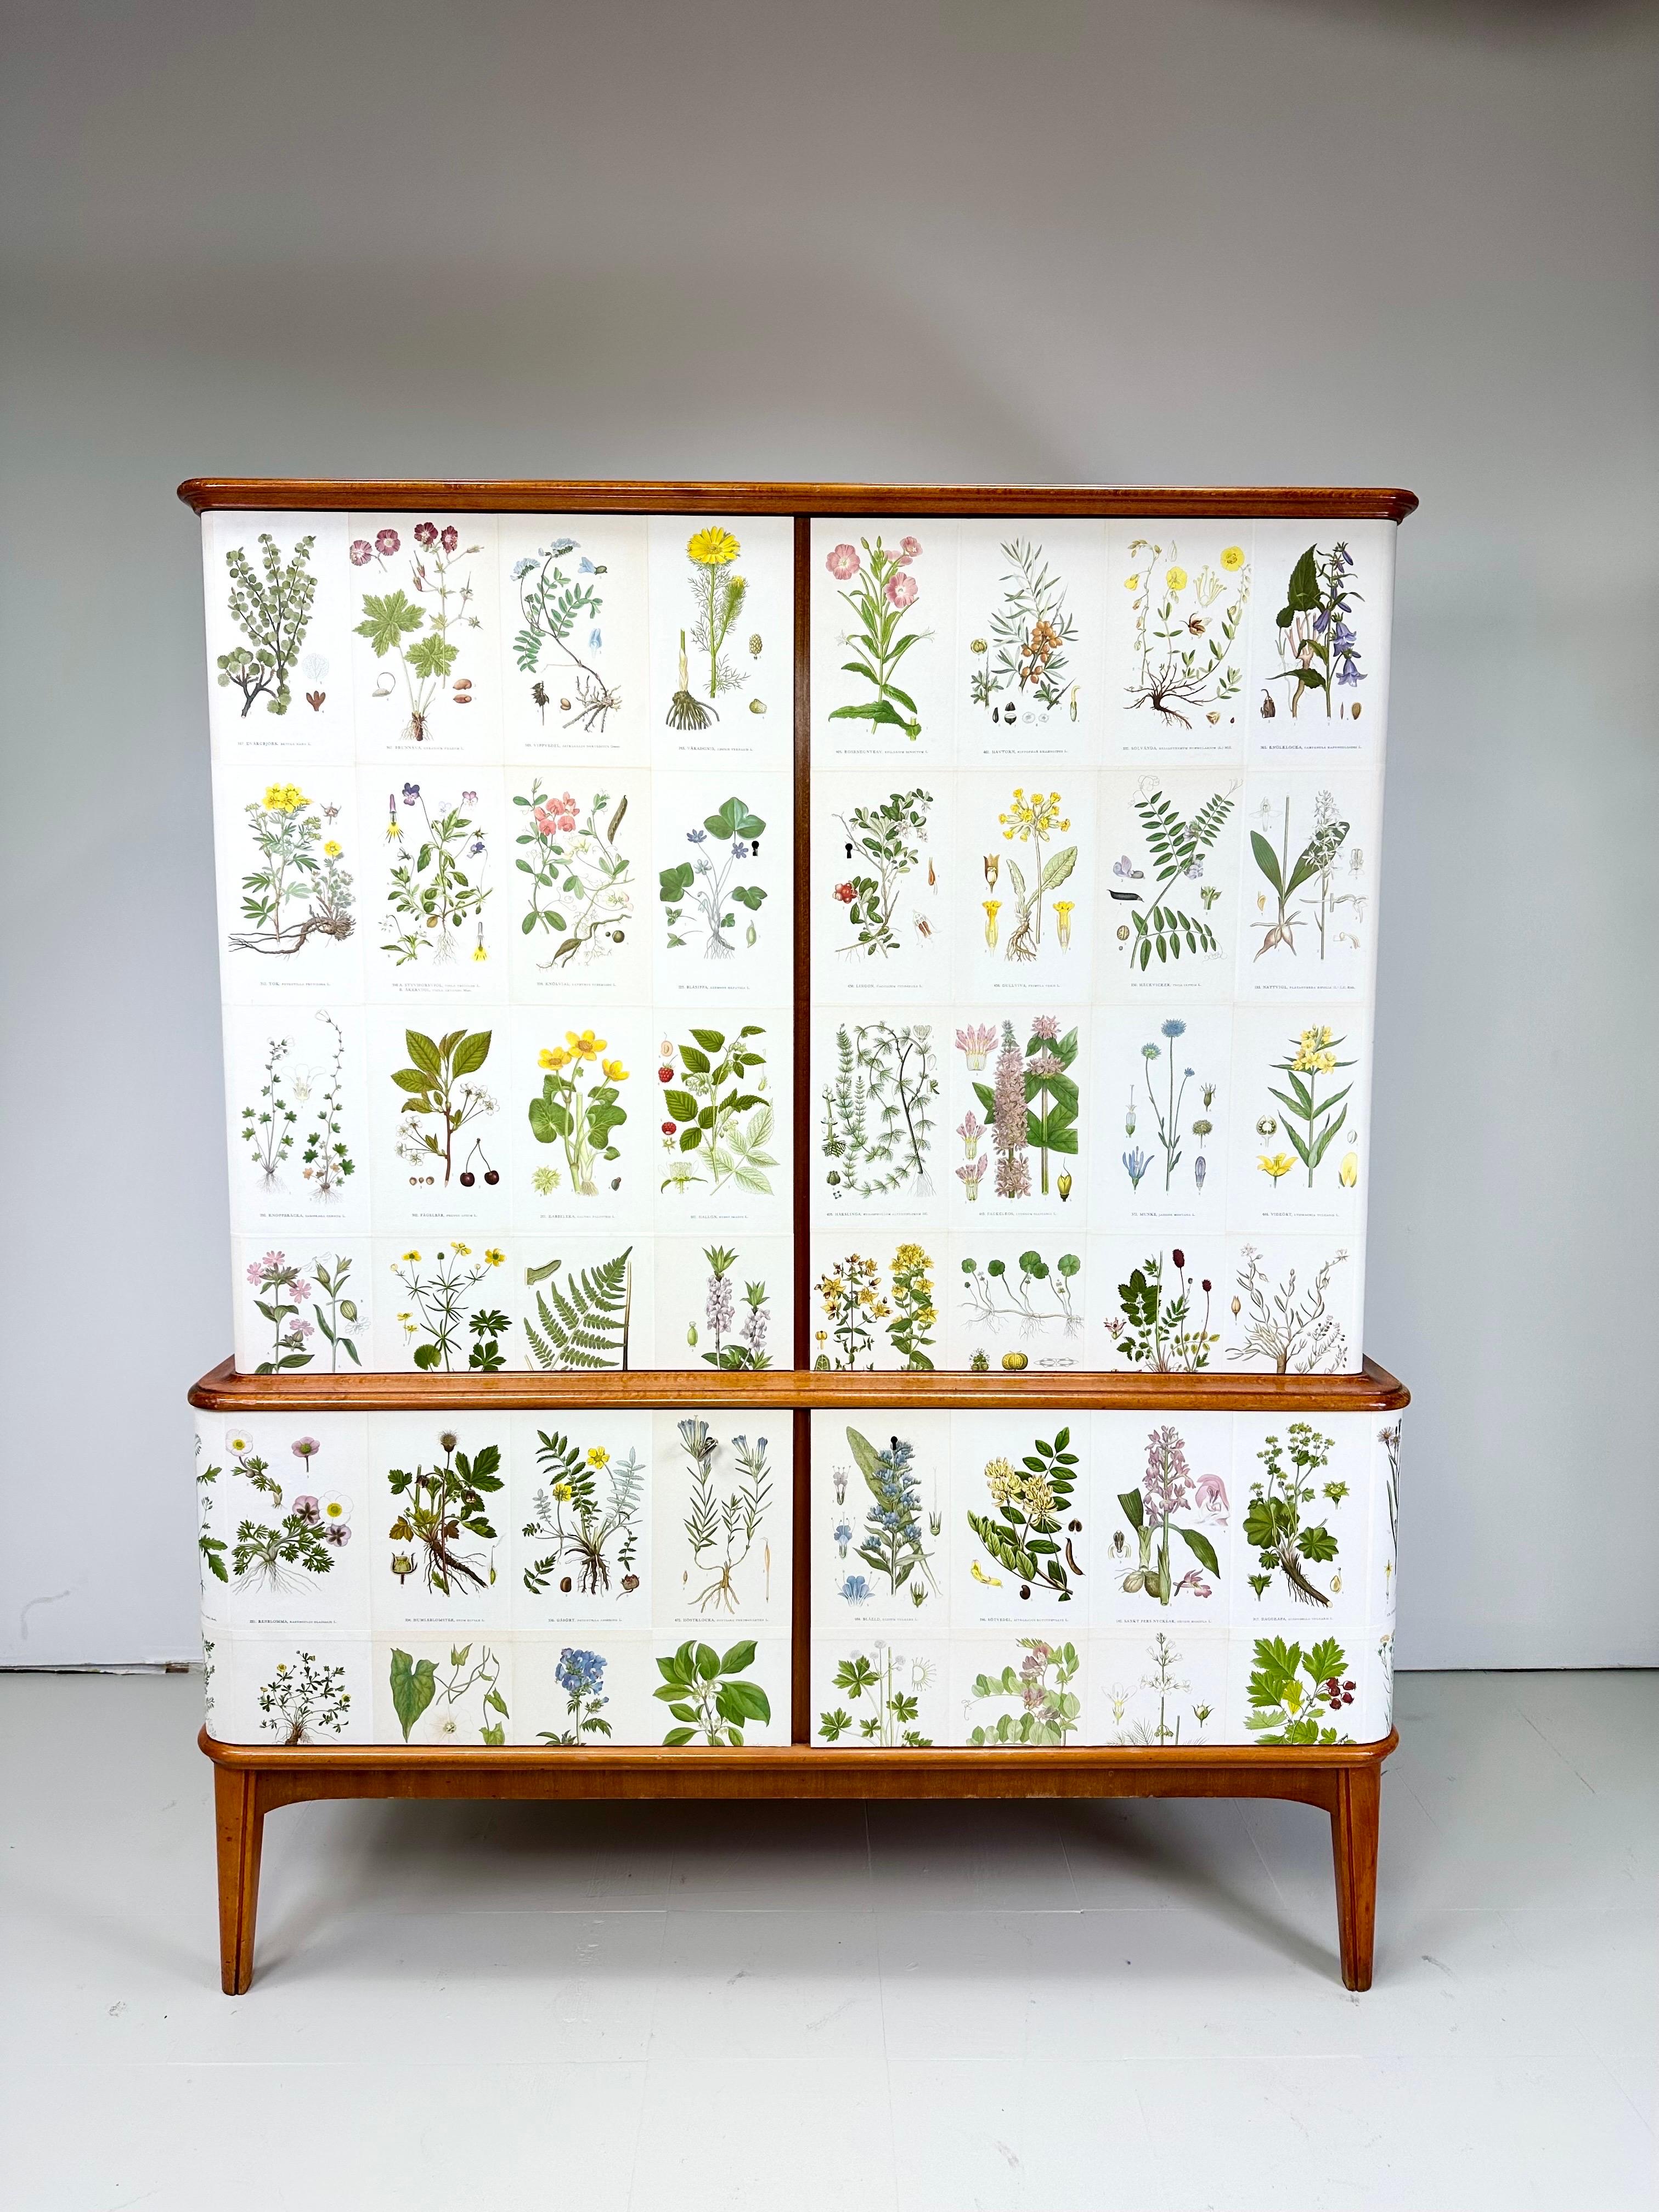 1950’s Swedish Cabinet papered with illustrations by C.A. Lindman, book Nordens Flora.

Cabinet consists of two large locking doors with four interior adjustable shelves. Two smaller locking doors on the lower portion of the cabinet conceal one